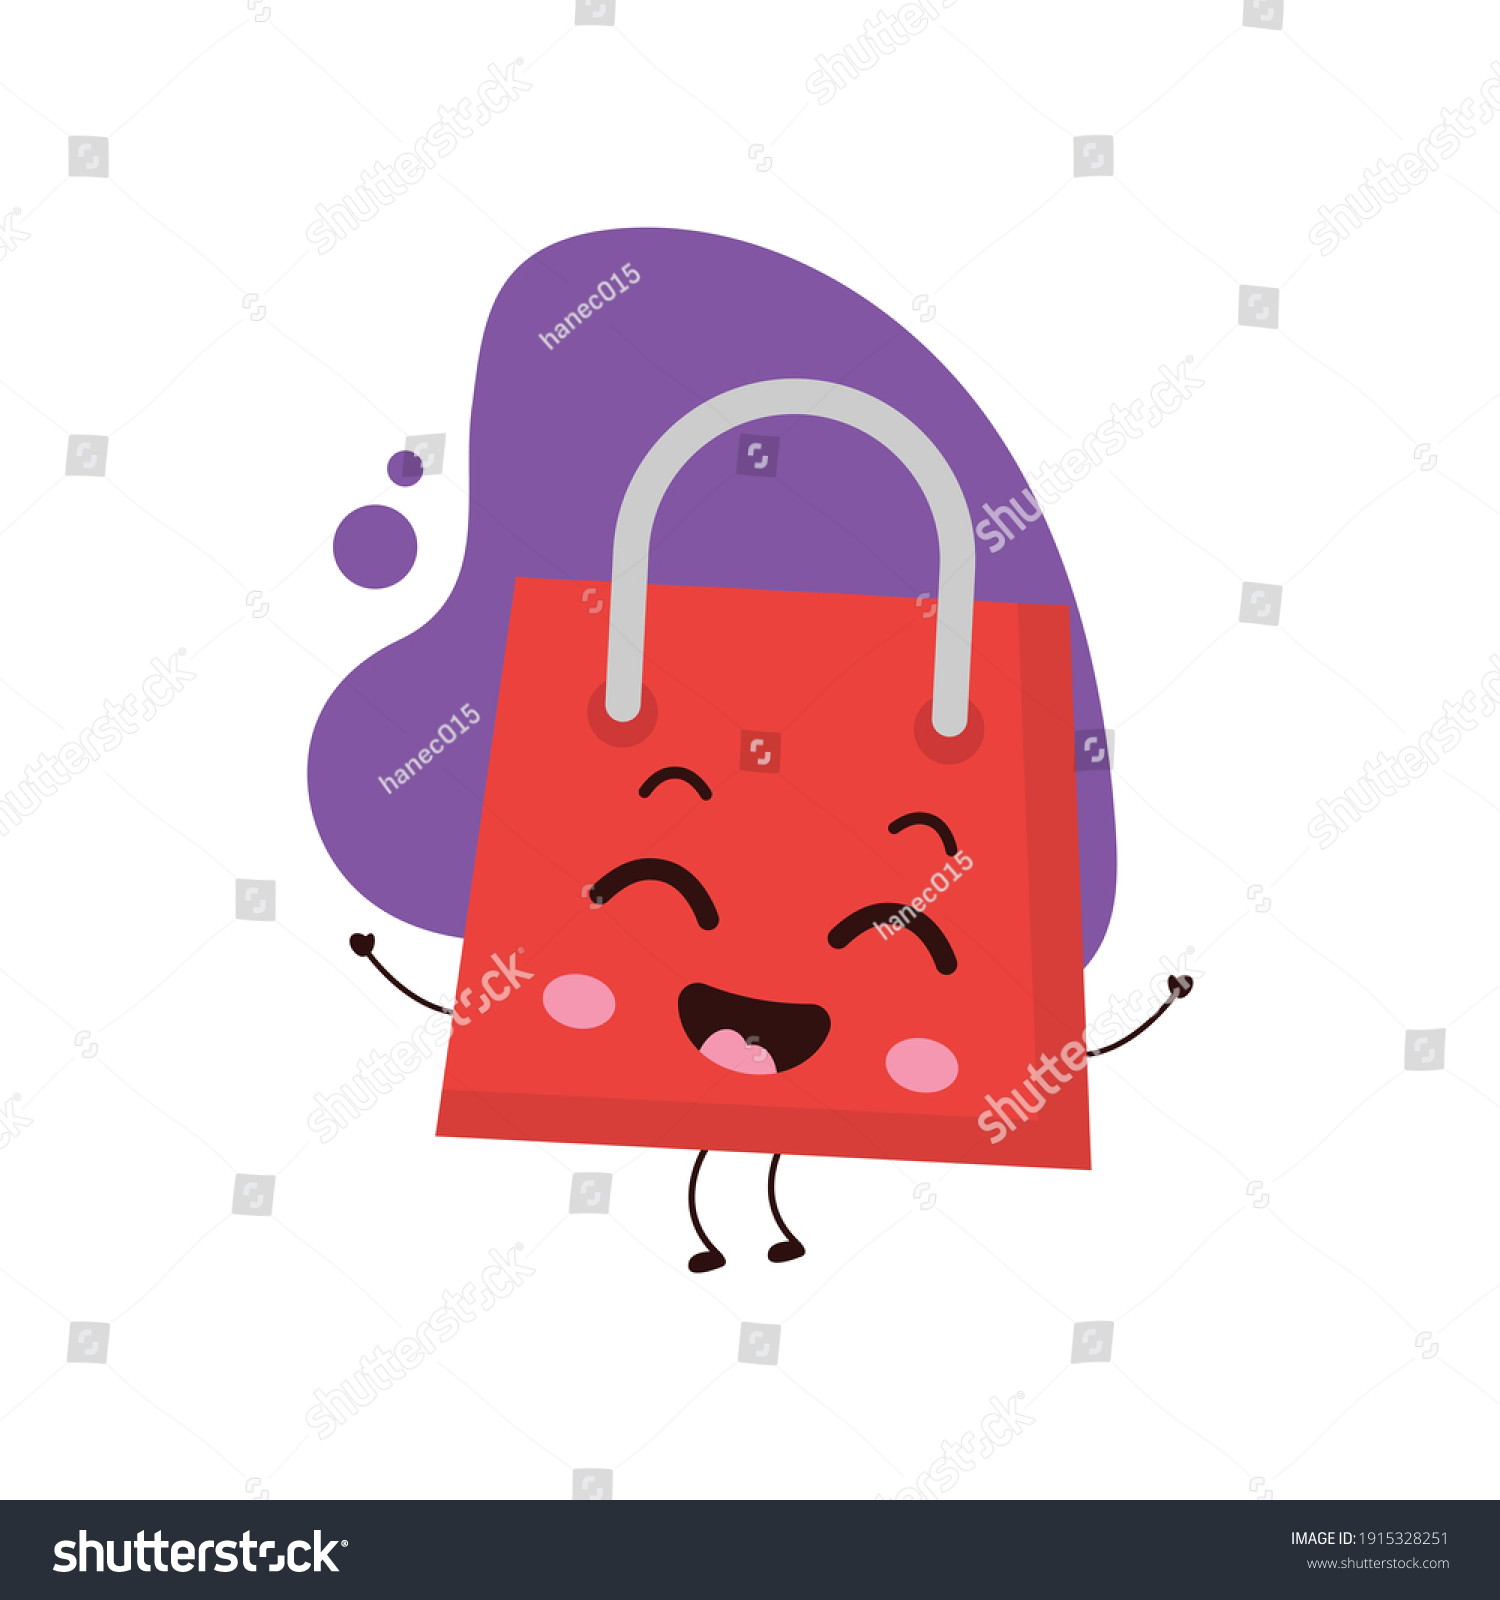 SVG of cute very happy shopping bag with laughter.illustration for business, t shirt, sticker, card or poster design.kawaii cartoon illustration for kids.funny vector illustration. svg